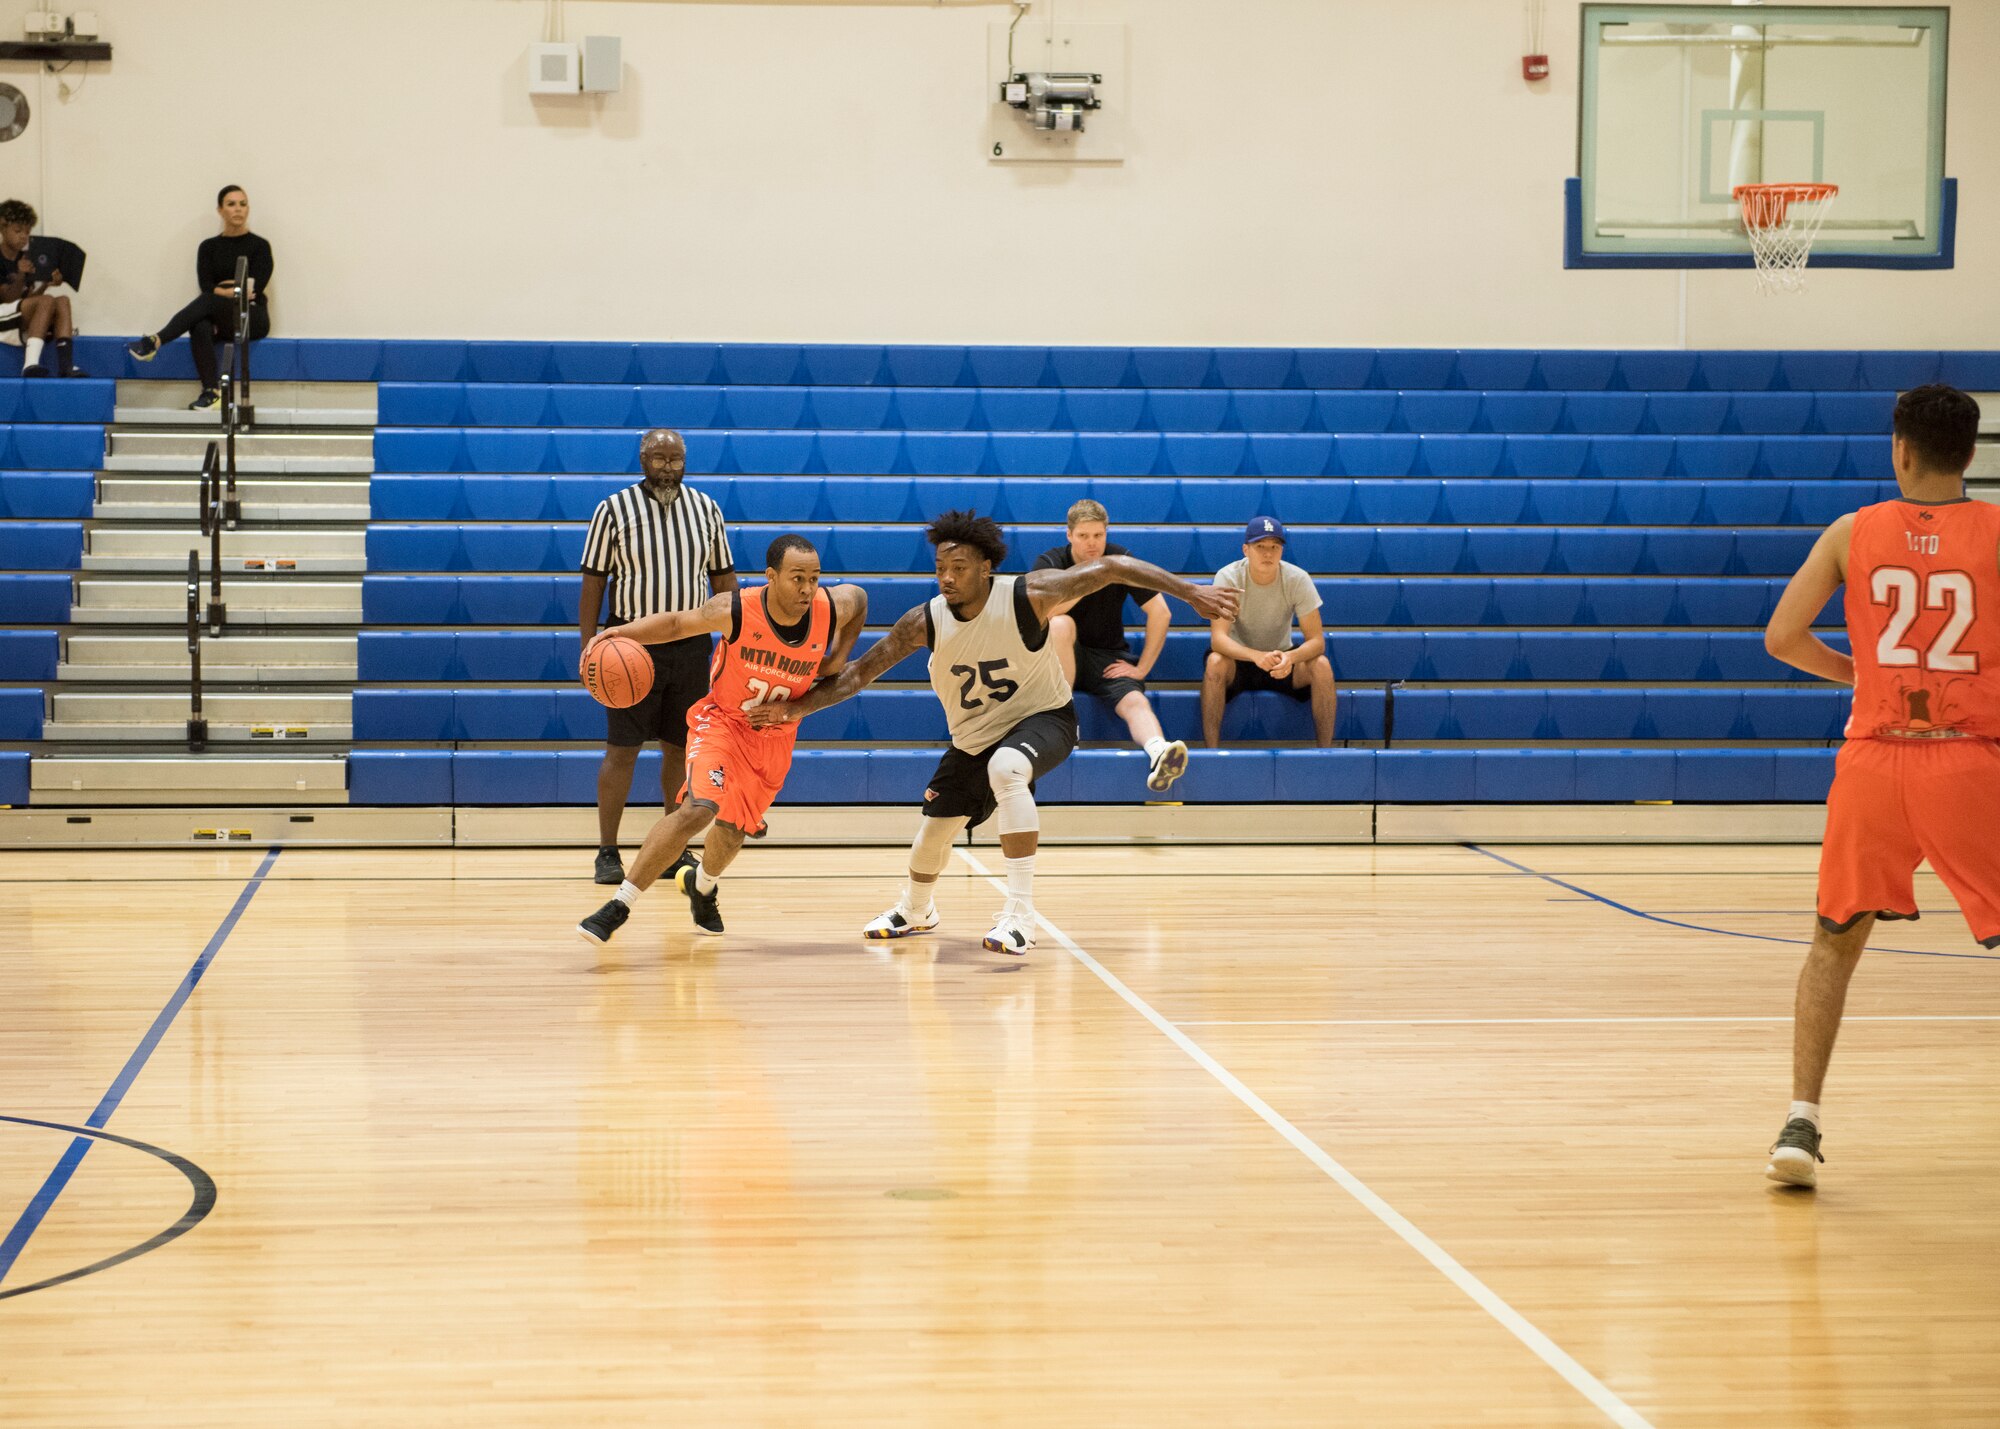 Players for the Mountain Home Air Force Base Gunfighters play against a local basketball team, Aug. 25, 2019, at Mountain Home Air Force Base, Idaho. The Gunfighters faced off with a team made of college players and players who've participated in the National Basketball Association's development league. (U.S. Air Force photo by Senior Airman Tyrell Hall)